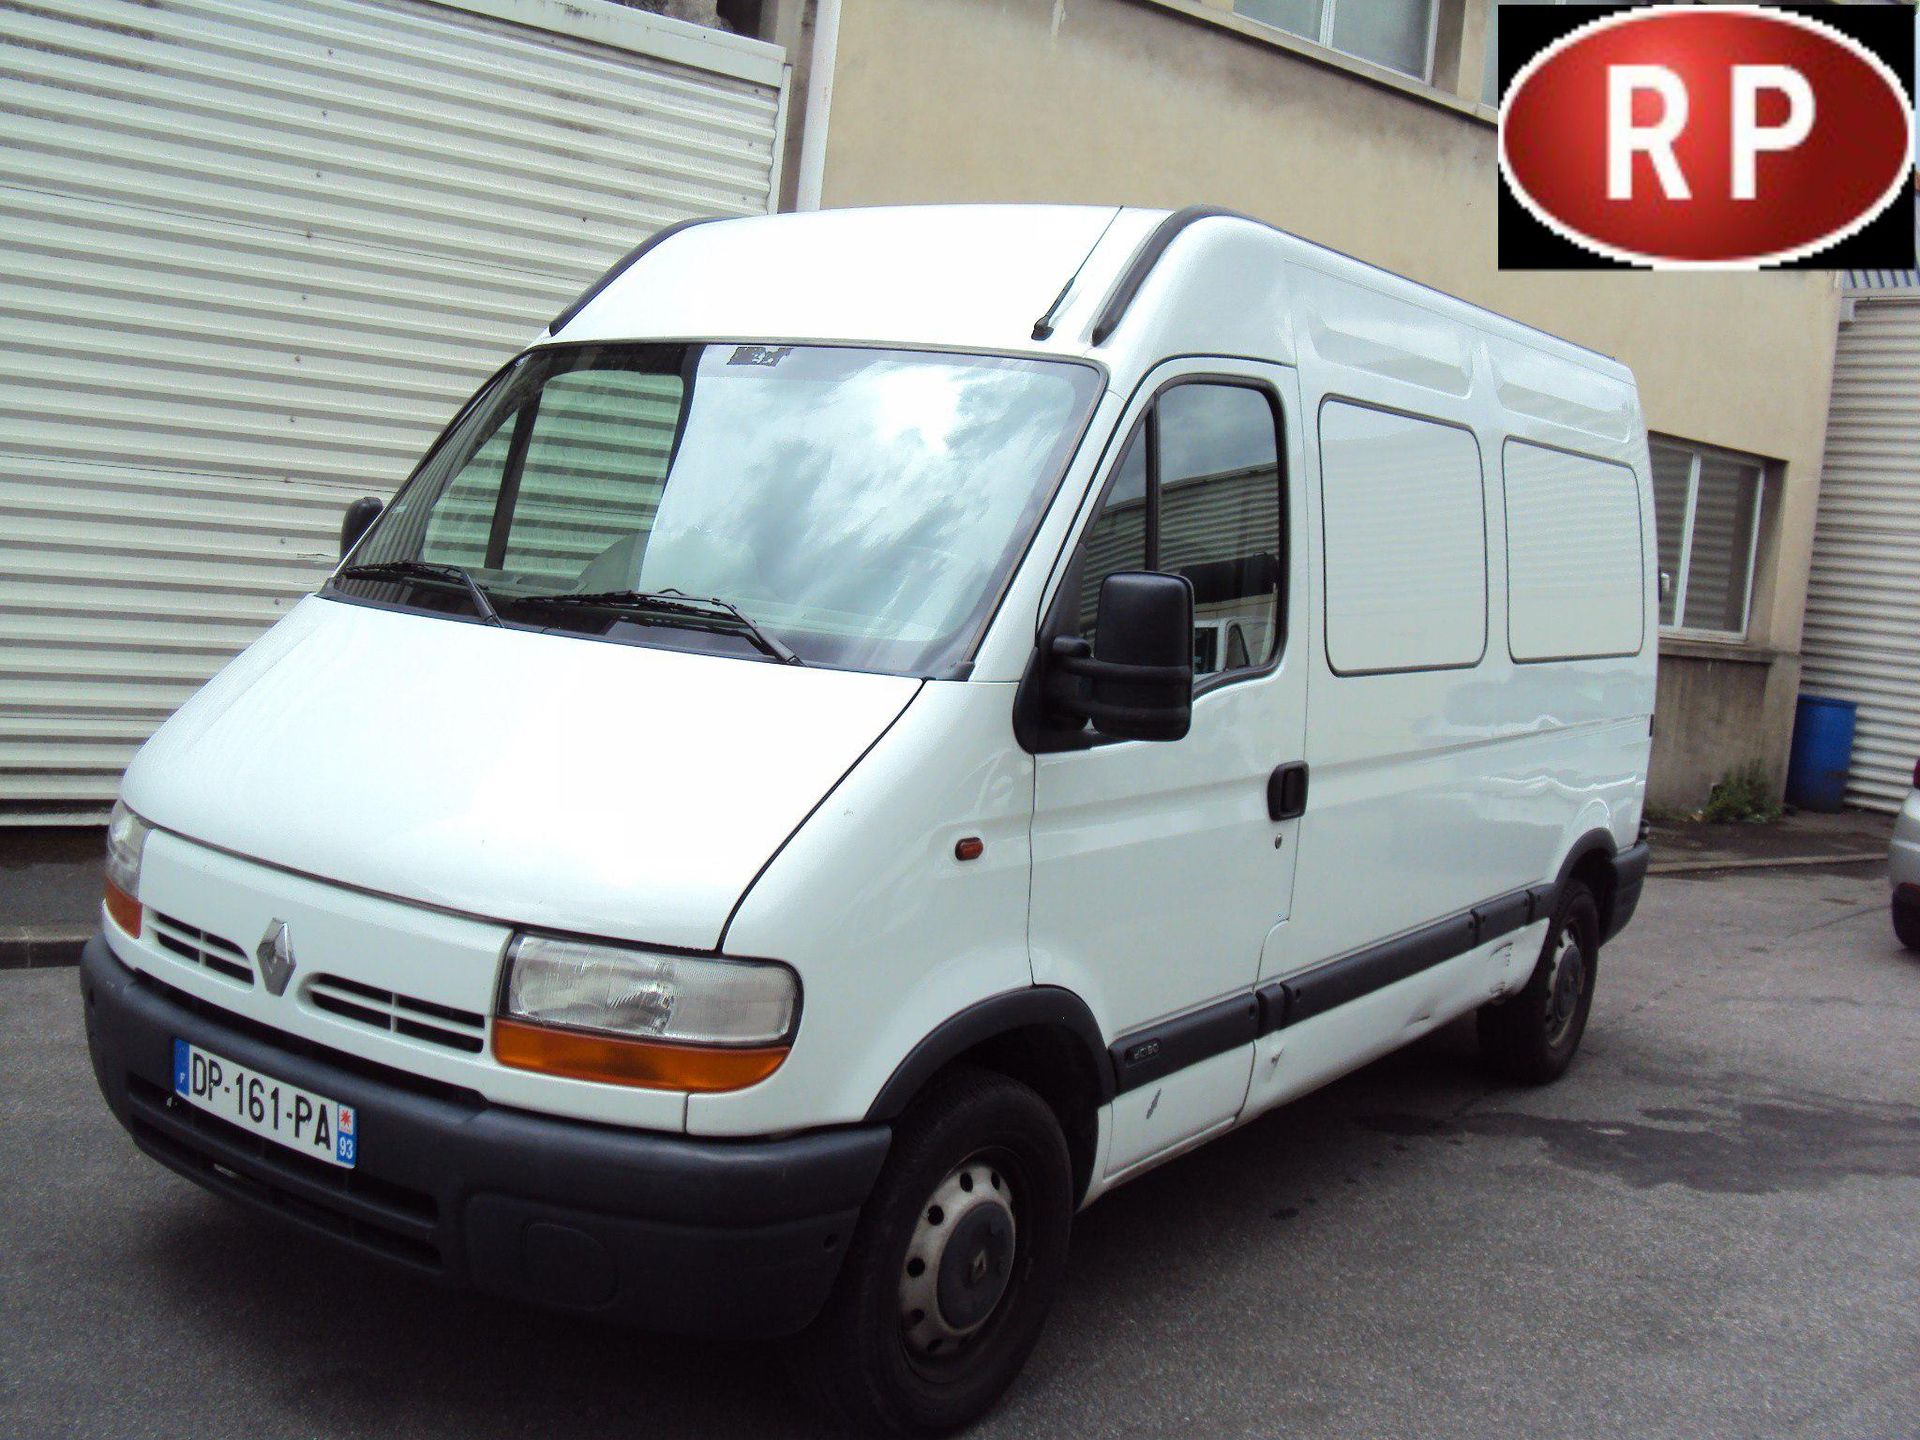 Null [RP] Utilitaire RENAULT Master T35 2.2 dCi fourgon 90, Gazole, 3 places, im&hellip;